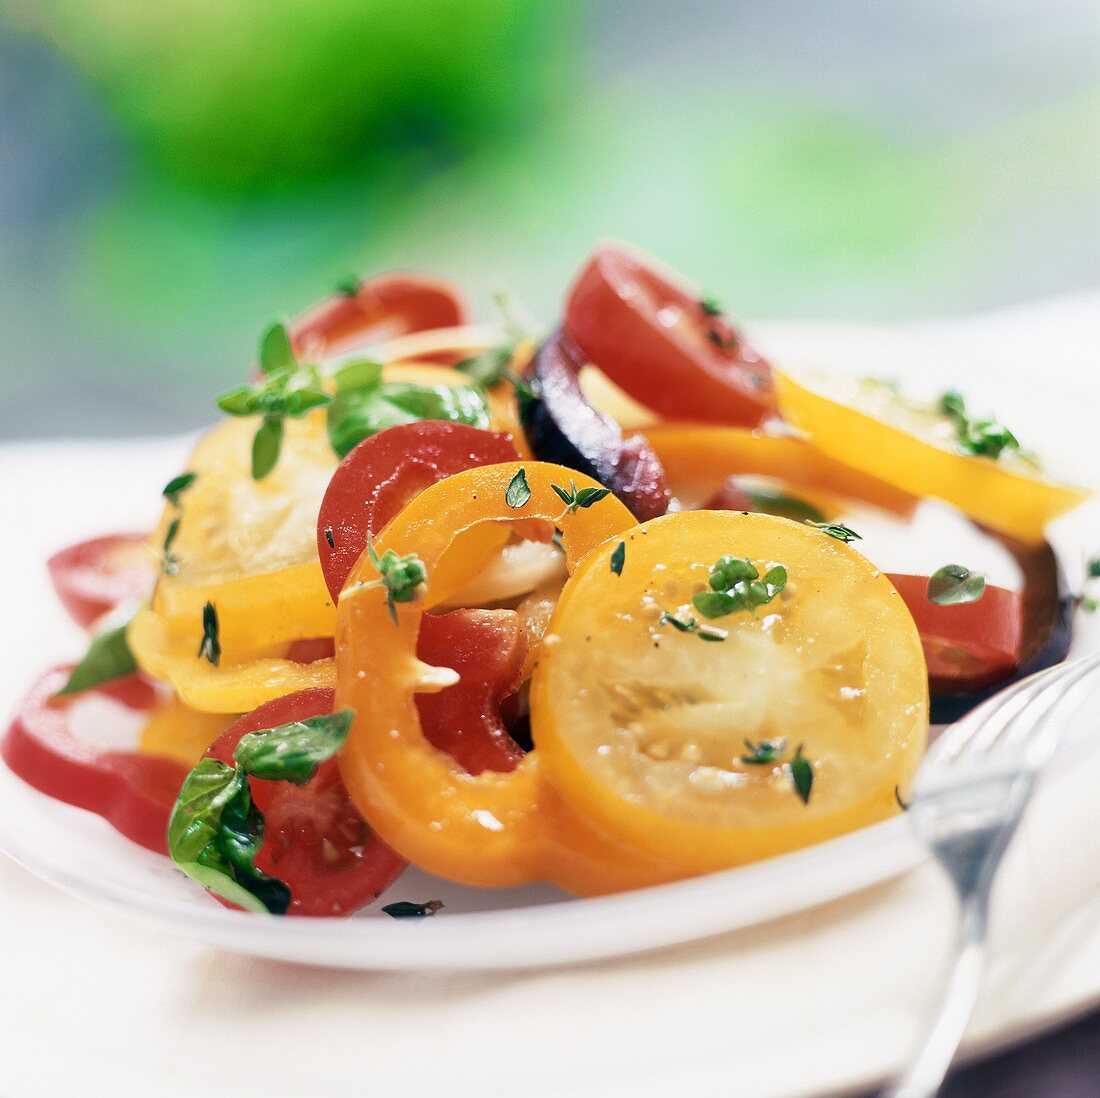 Tomato and pepper salad with fresh herbs